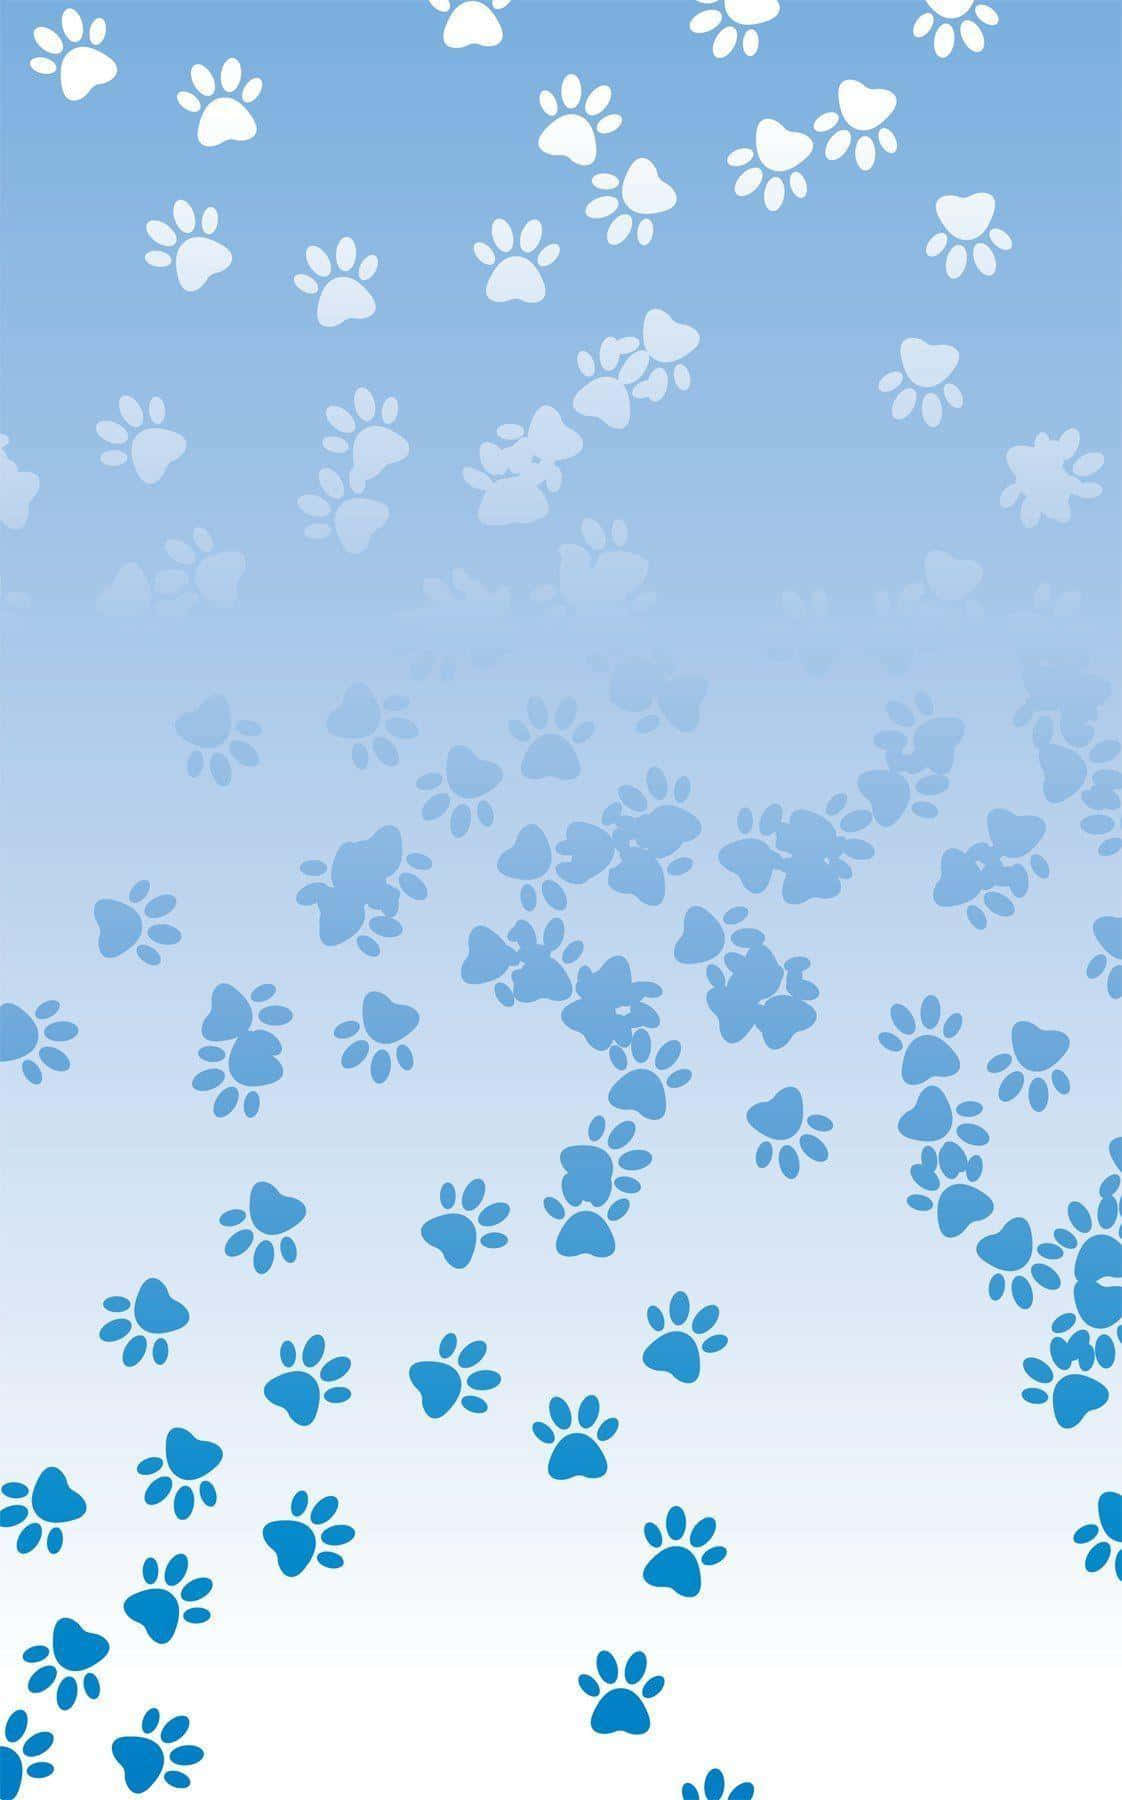 paw prints in the sky vector